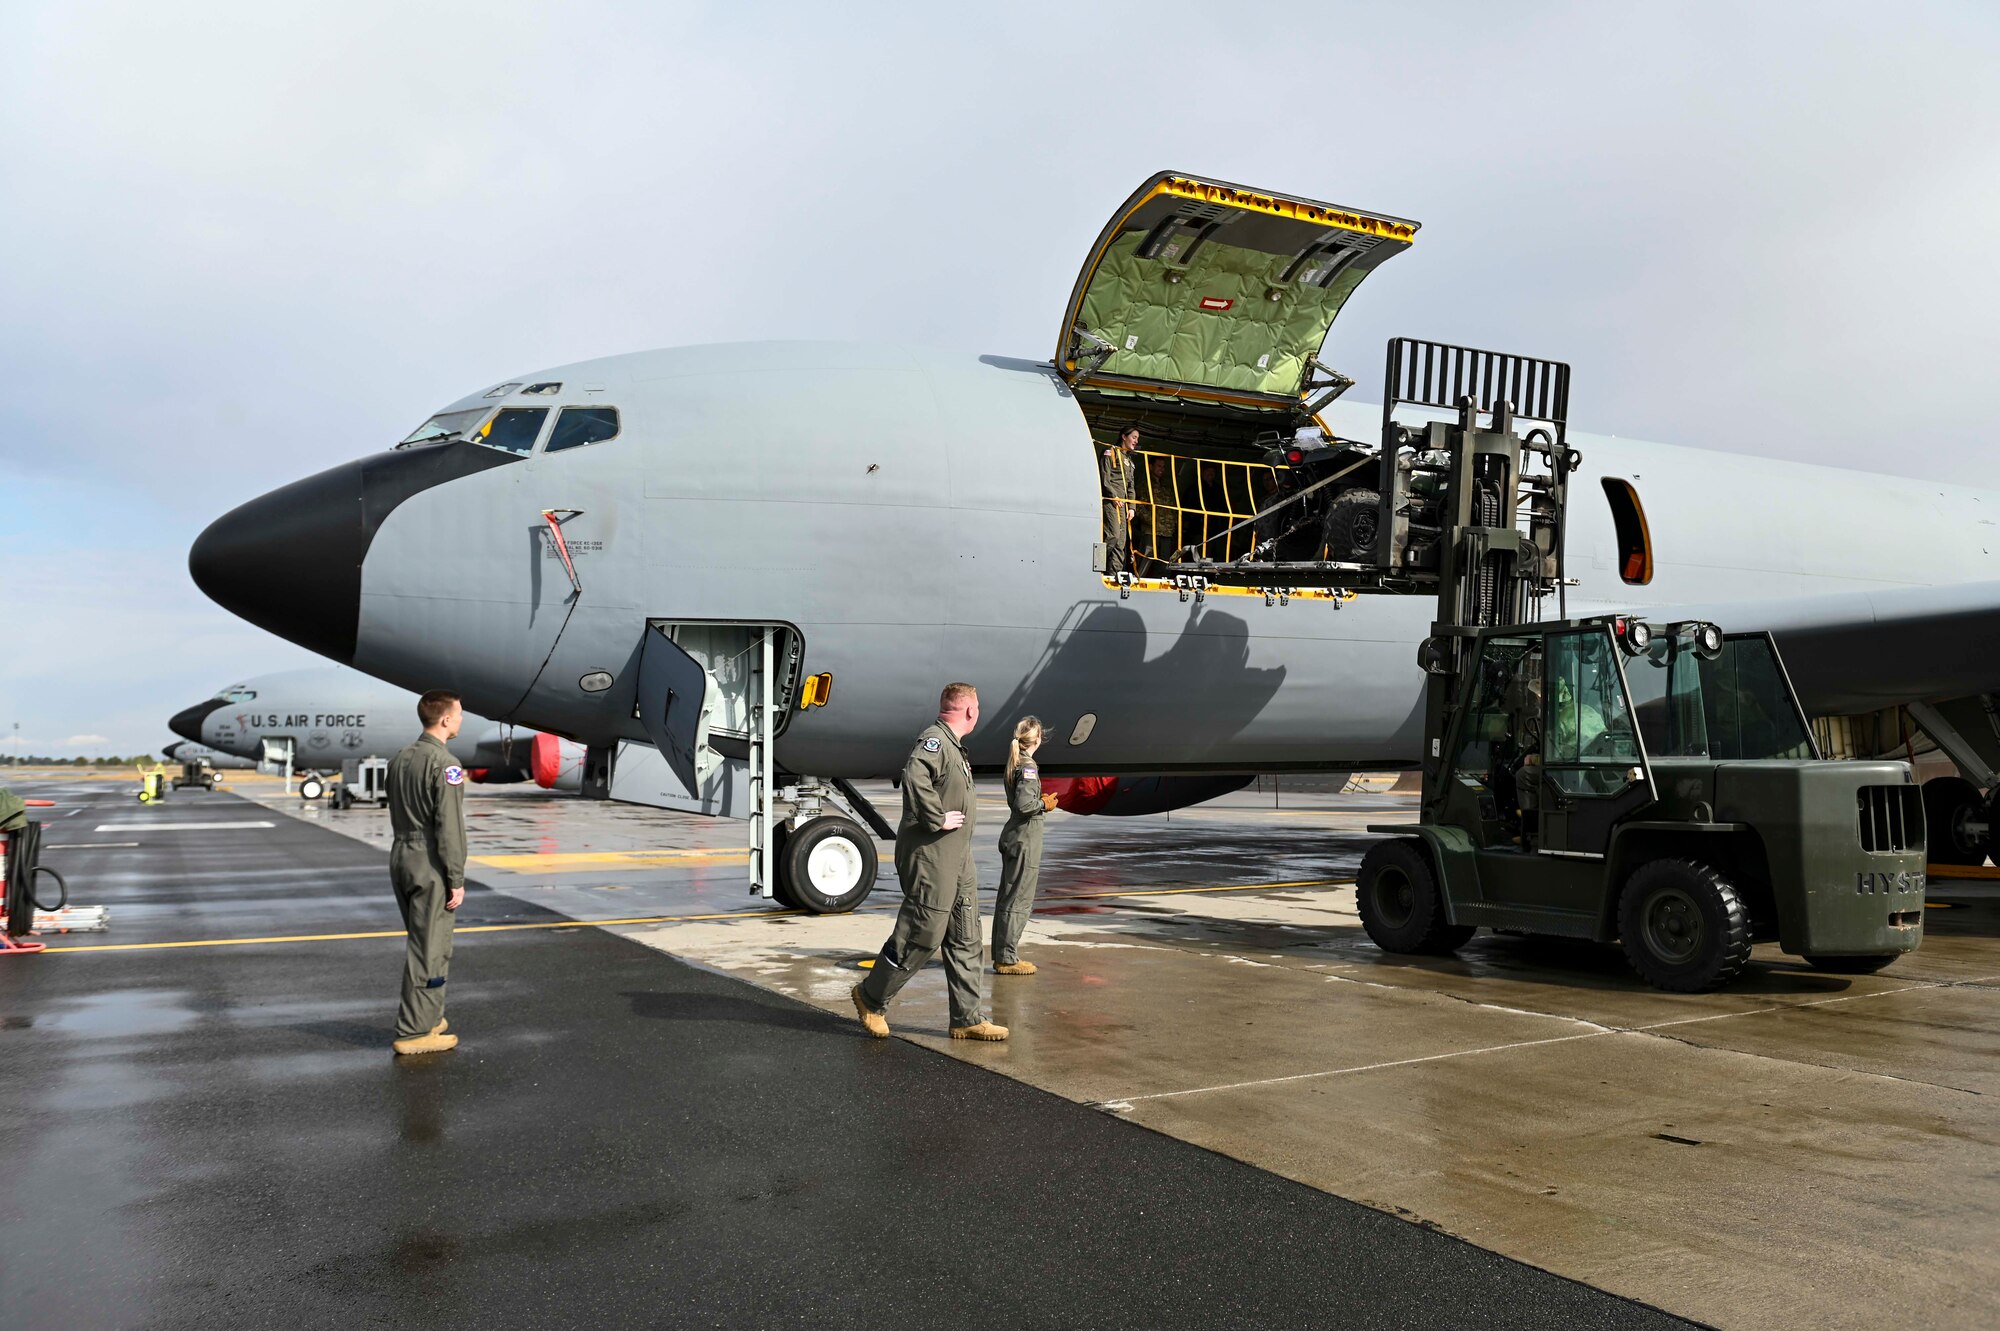 Airmen guide cargo into a KC-135 Stratotanker from a forklift